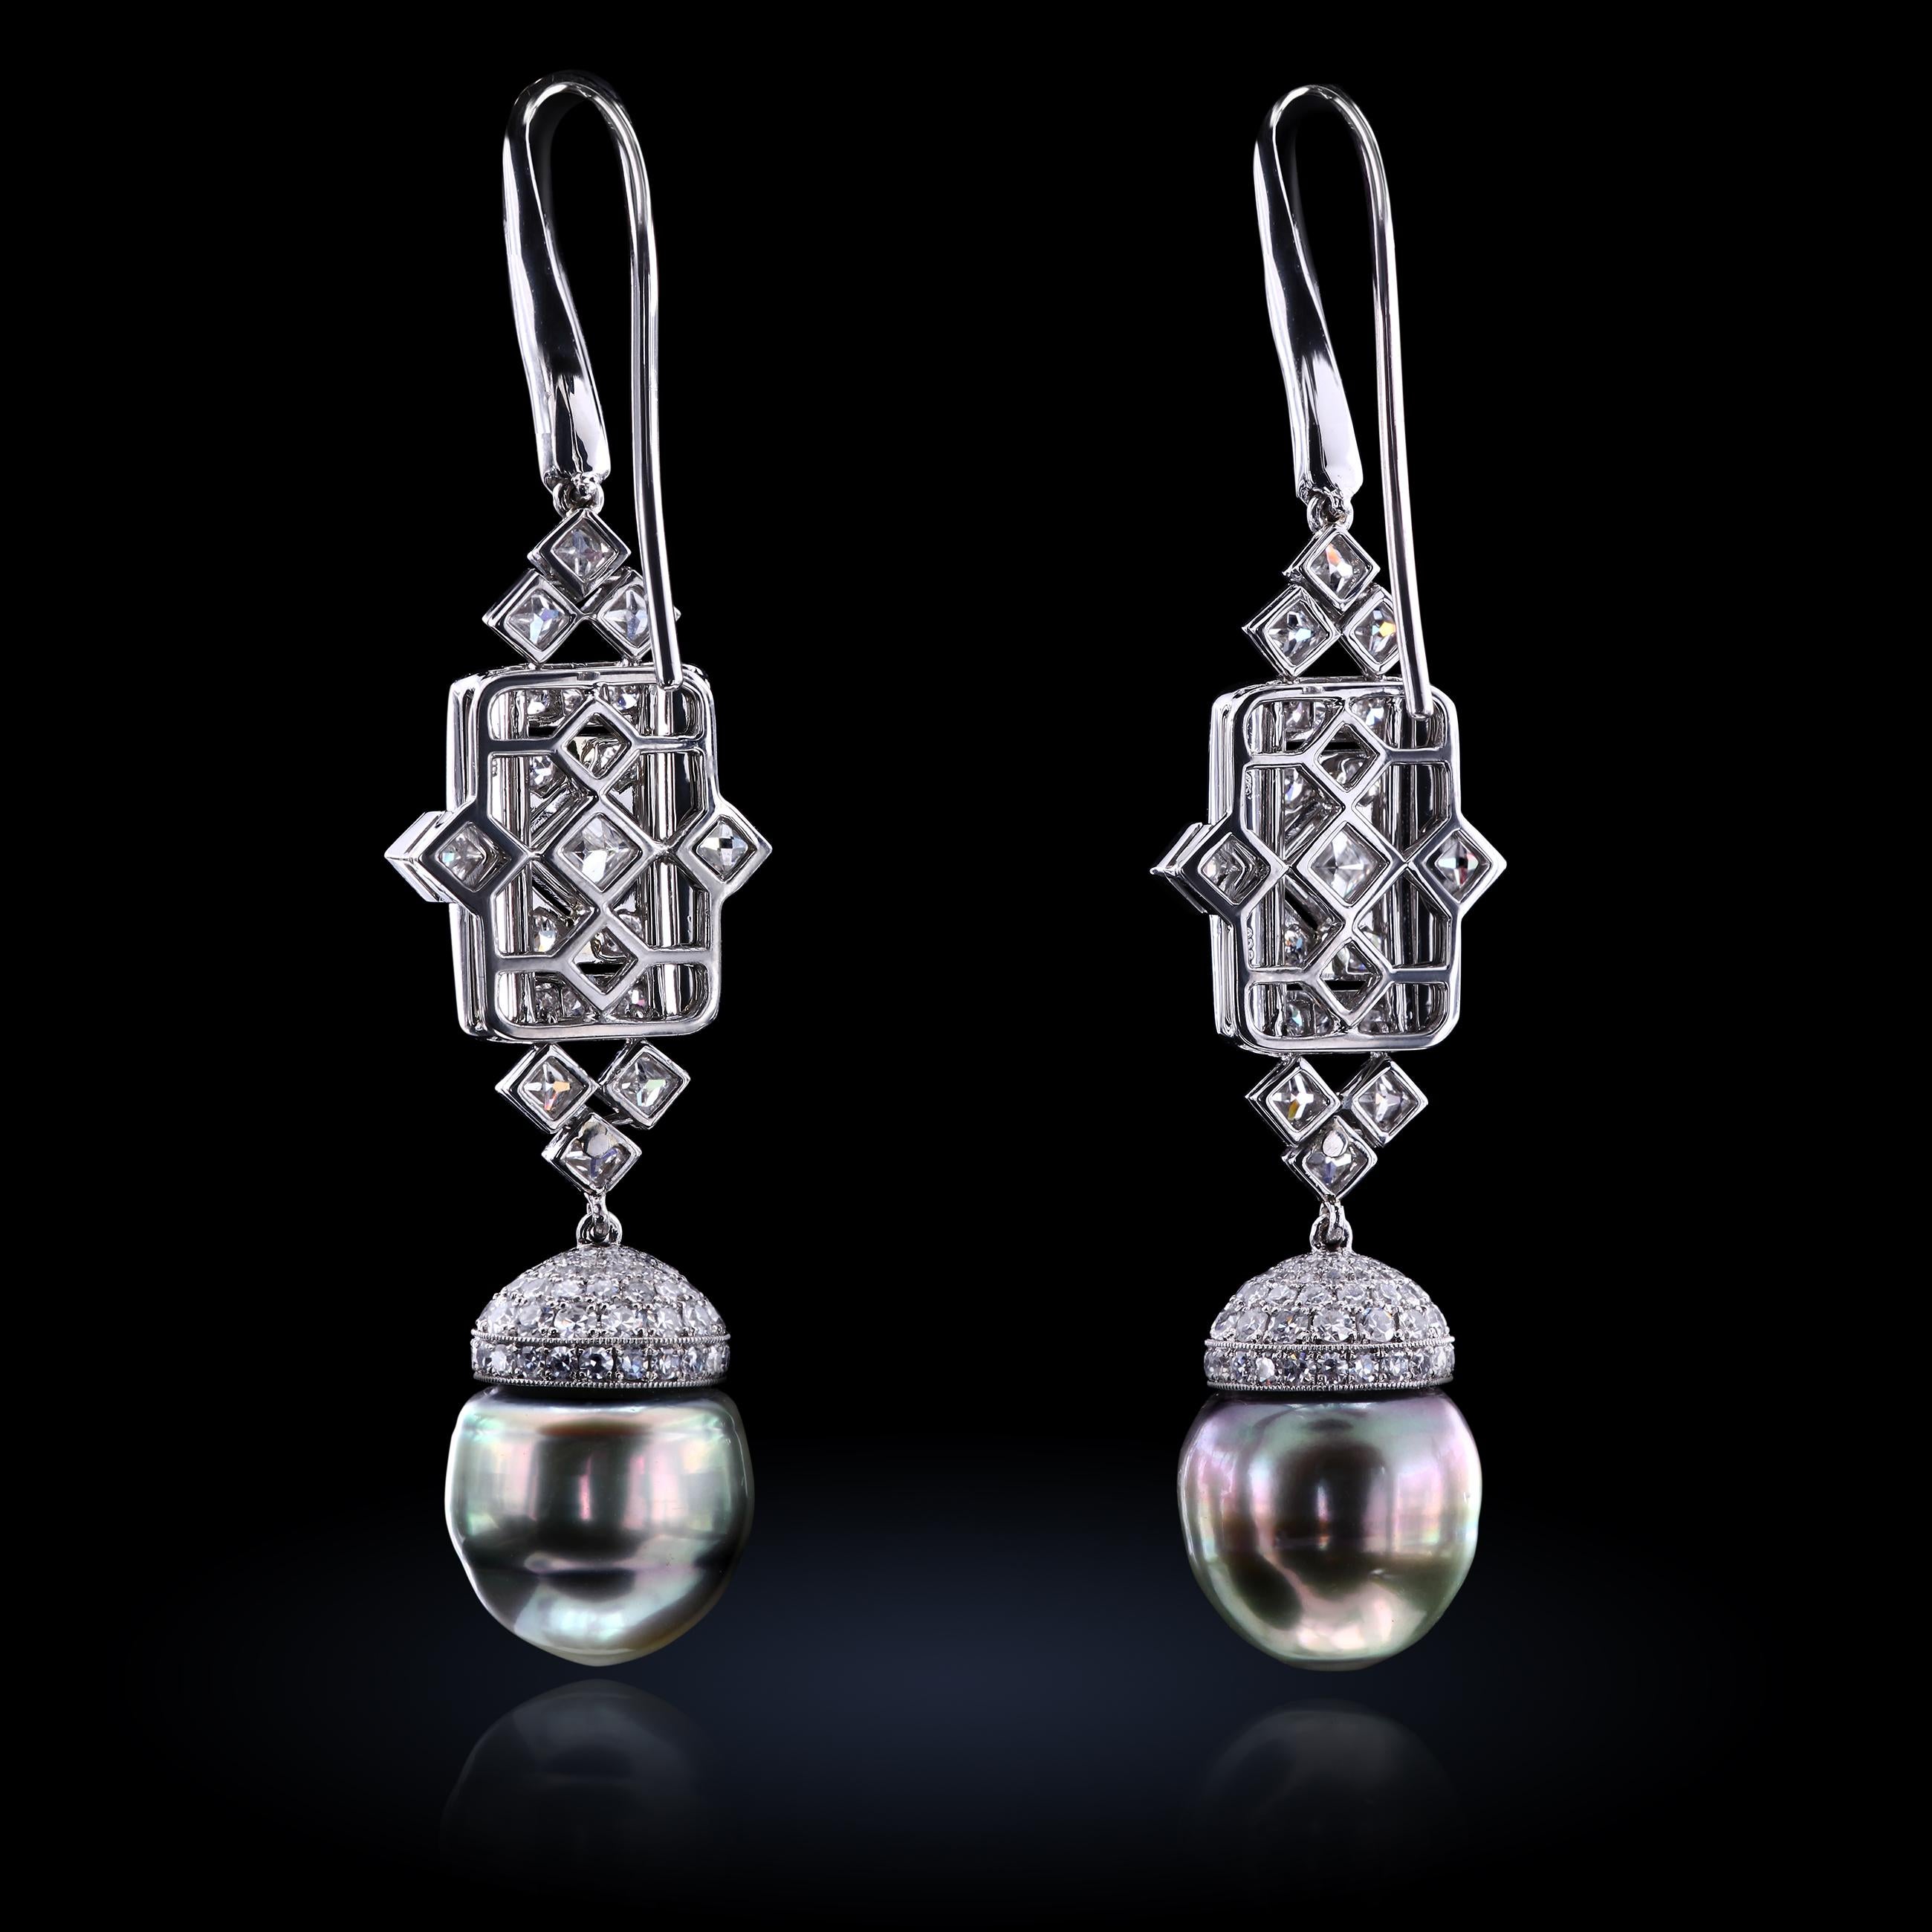 Contemporary Art Deco Style Earrings with Pearls, Round and French Cut Diamonds In Platinum